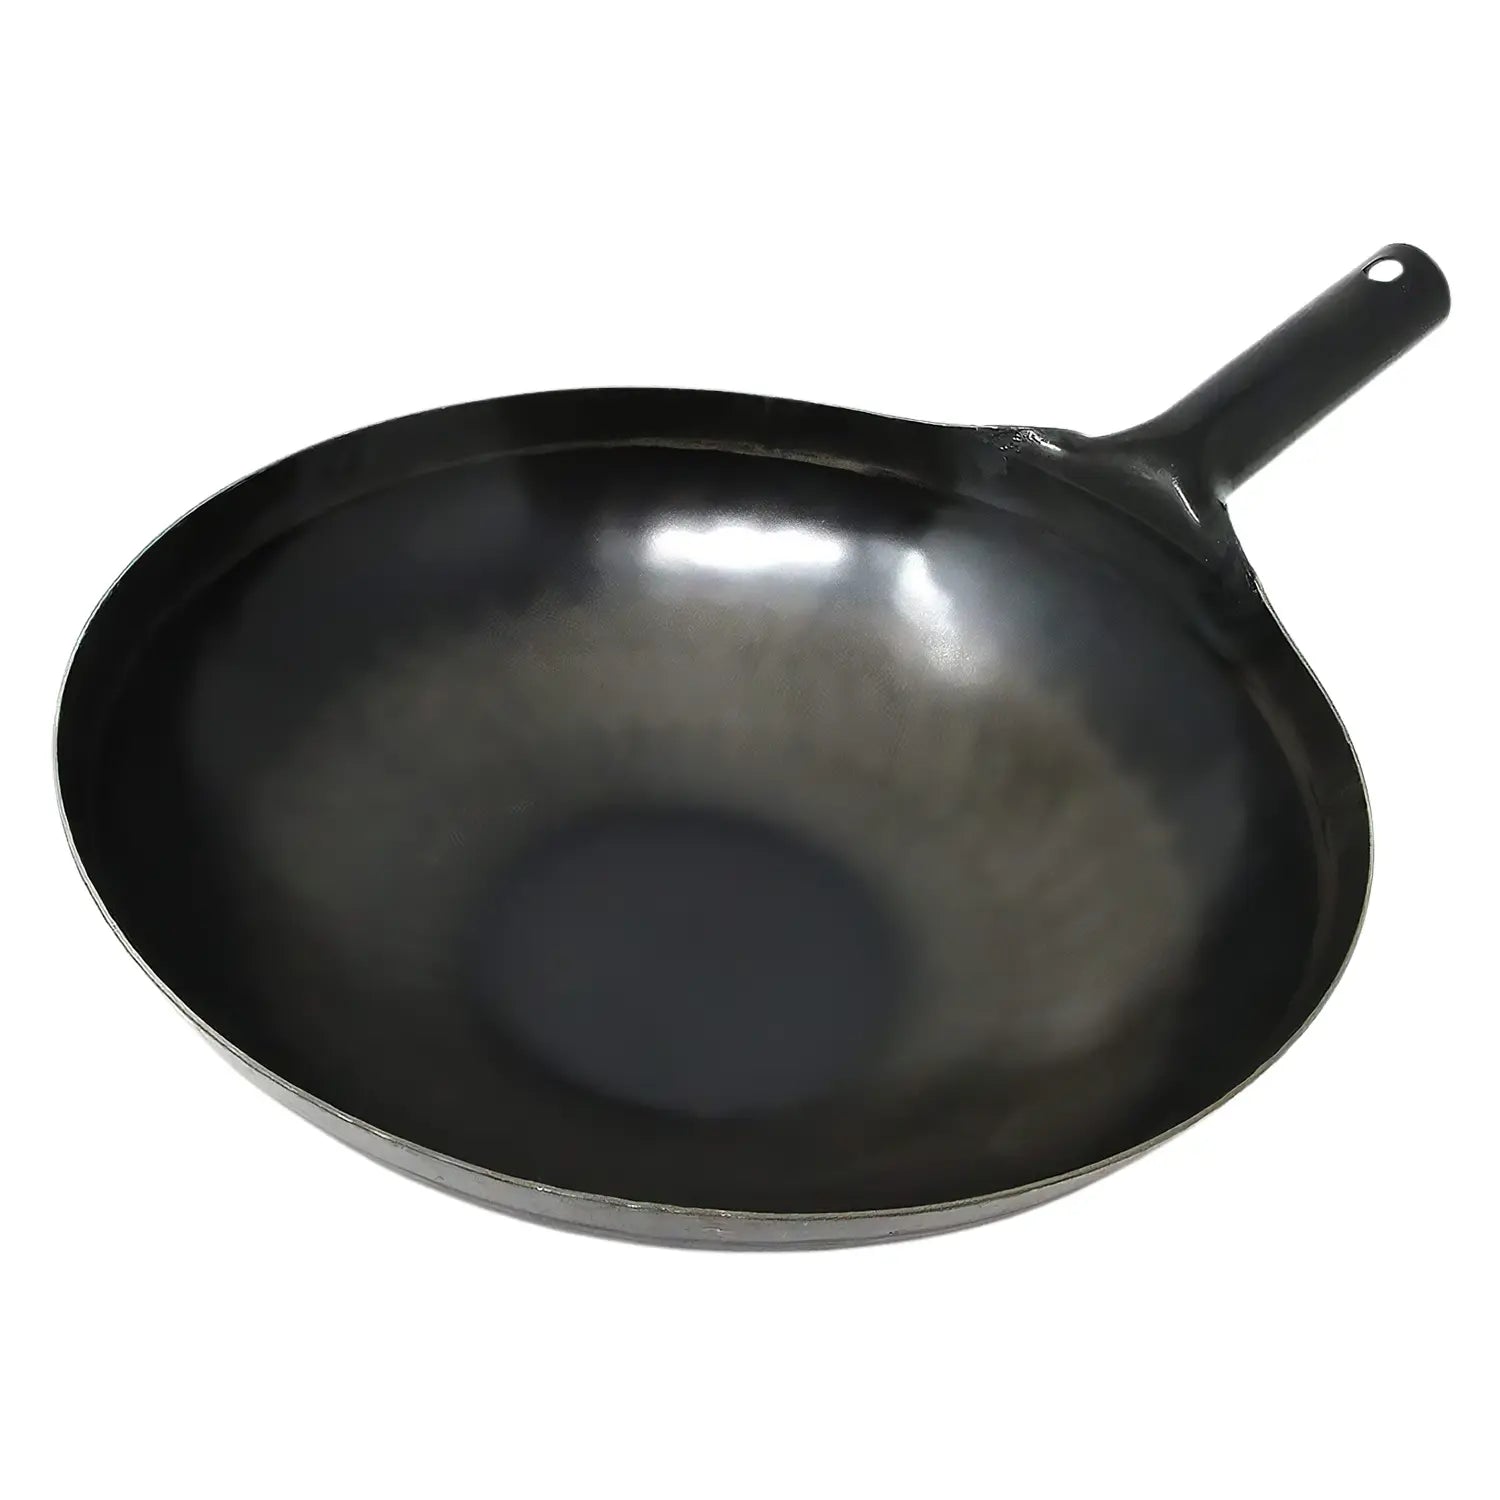 28cm Upgraded Chinese Cast Iron Wok With Lid Carbon Steel Pan Flat